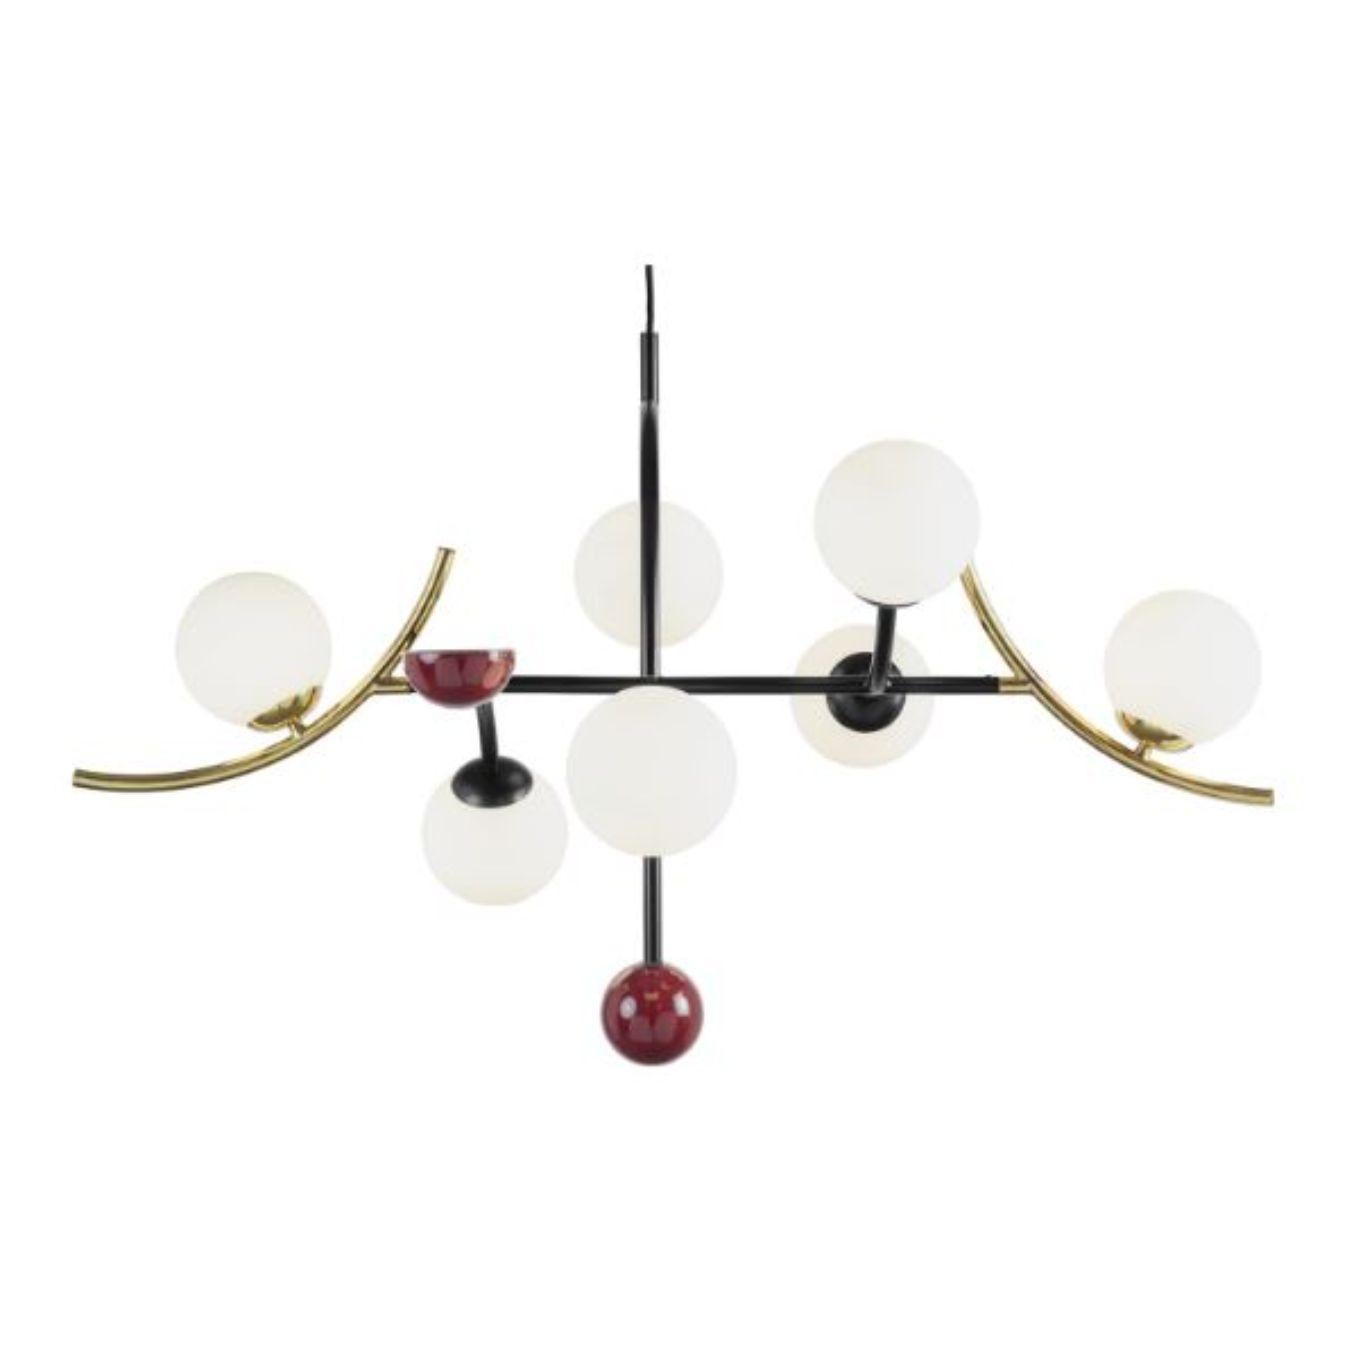 Wine Helio Suspension lamp by dooq
Dimensions: W 130 x D 70 x H 80 cm
Materials: lacquered metal, brass/nickel.
Also available in different colours.

Information:
230V/50Hz
7 x max. G9
4W LED

120V/60Hz
7 x max. G9
4W LED

Cable: 59”/1,5m

All our